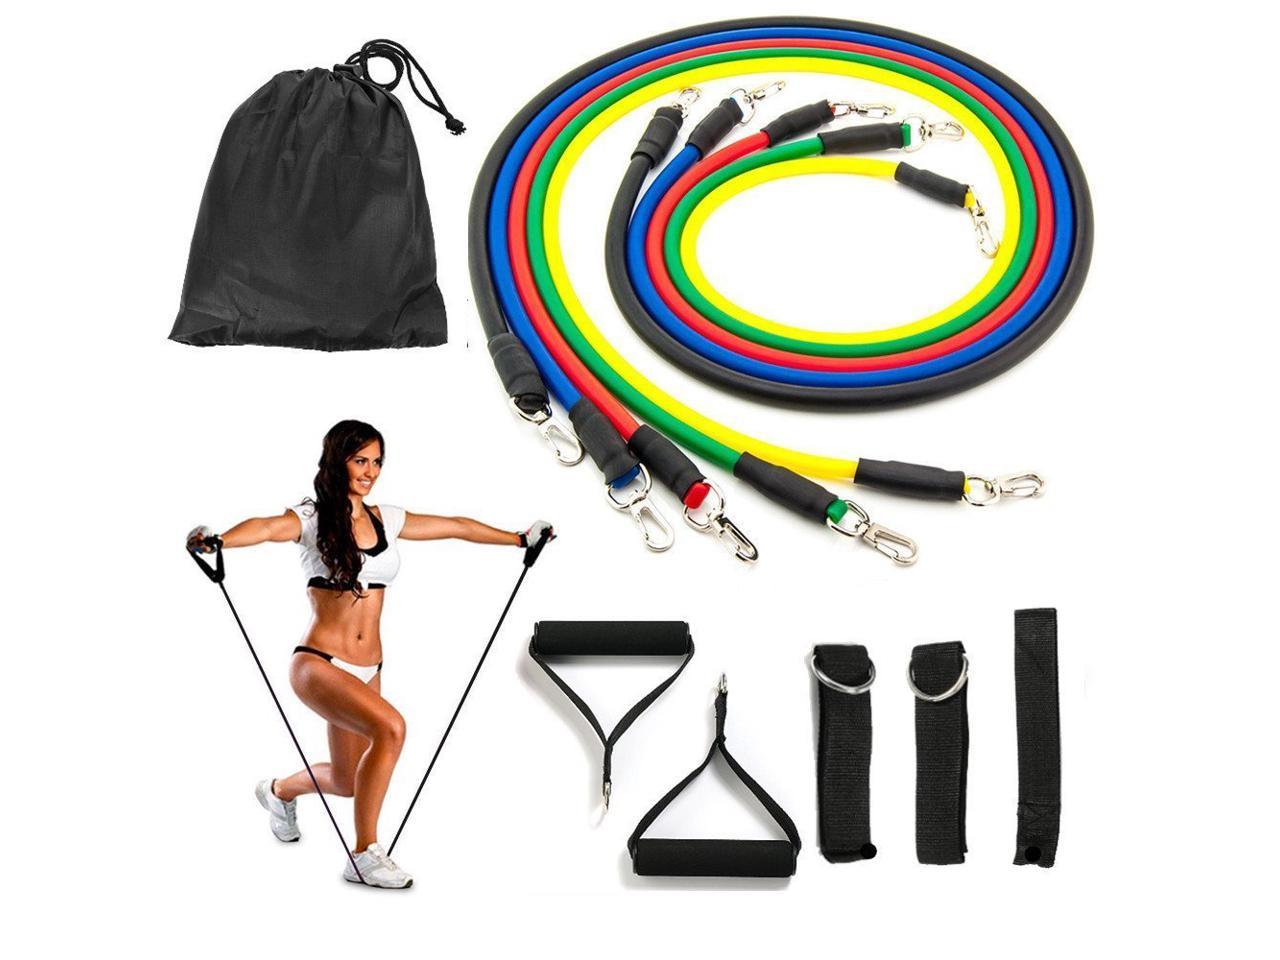 Details about   6pc FITNESS STRECH BANDS Portable Exercise Band Set w/ Door Anchor Carrying Case 